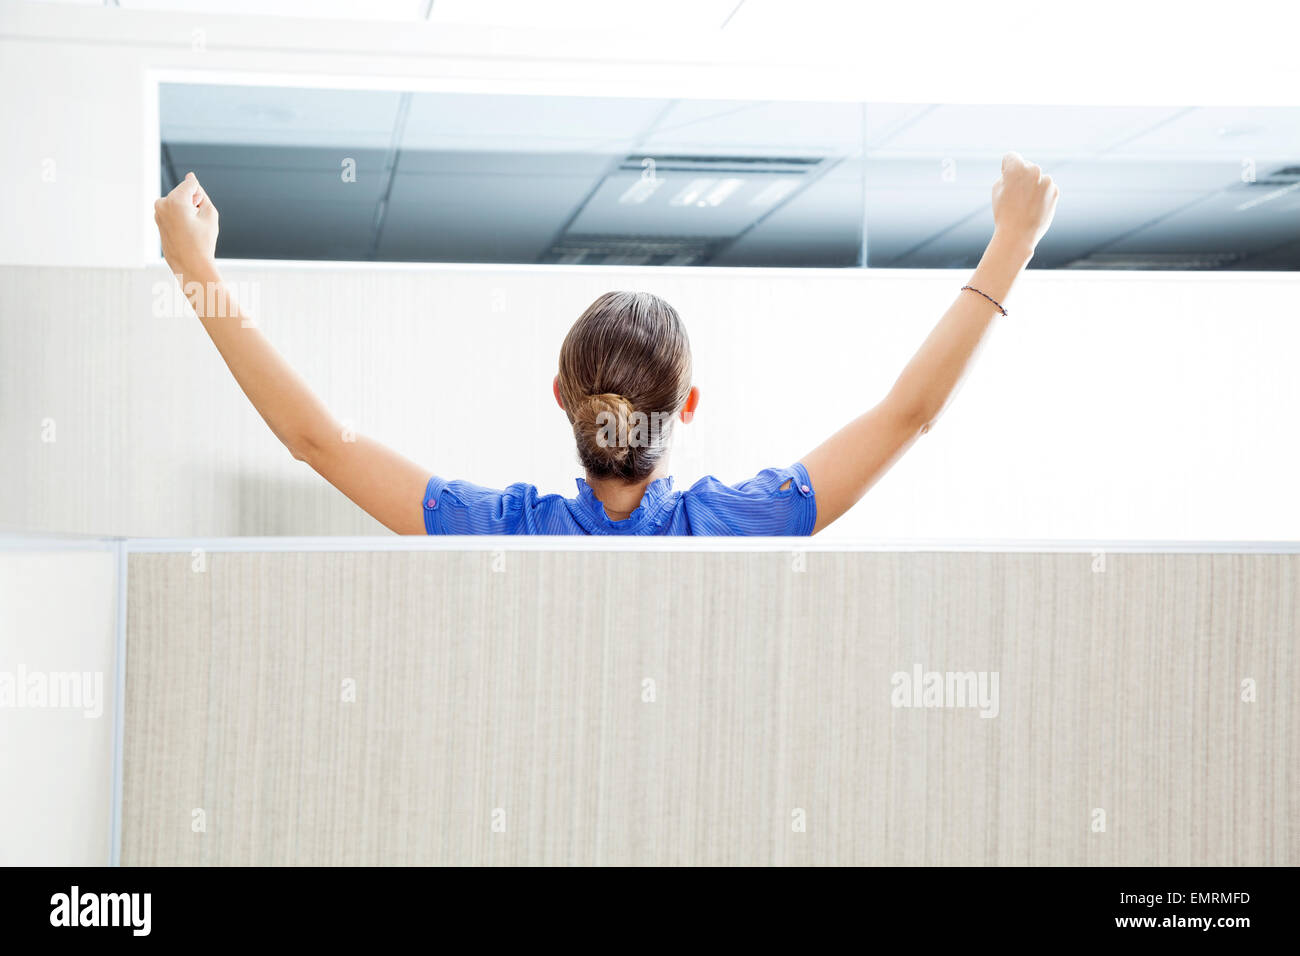 Customer Service Representative With Arms Raised In Cubicle Stock Photo